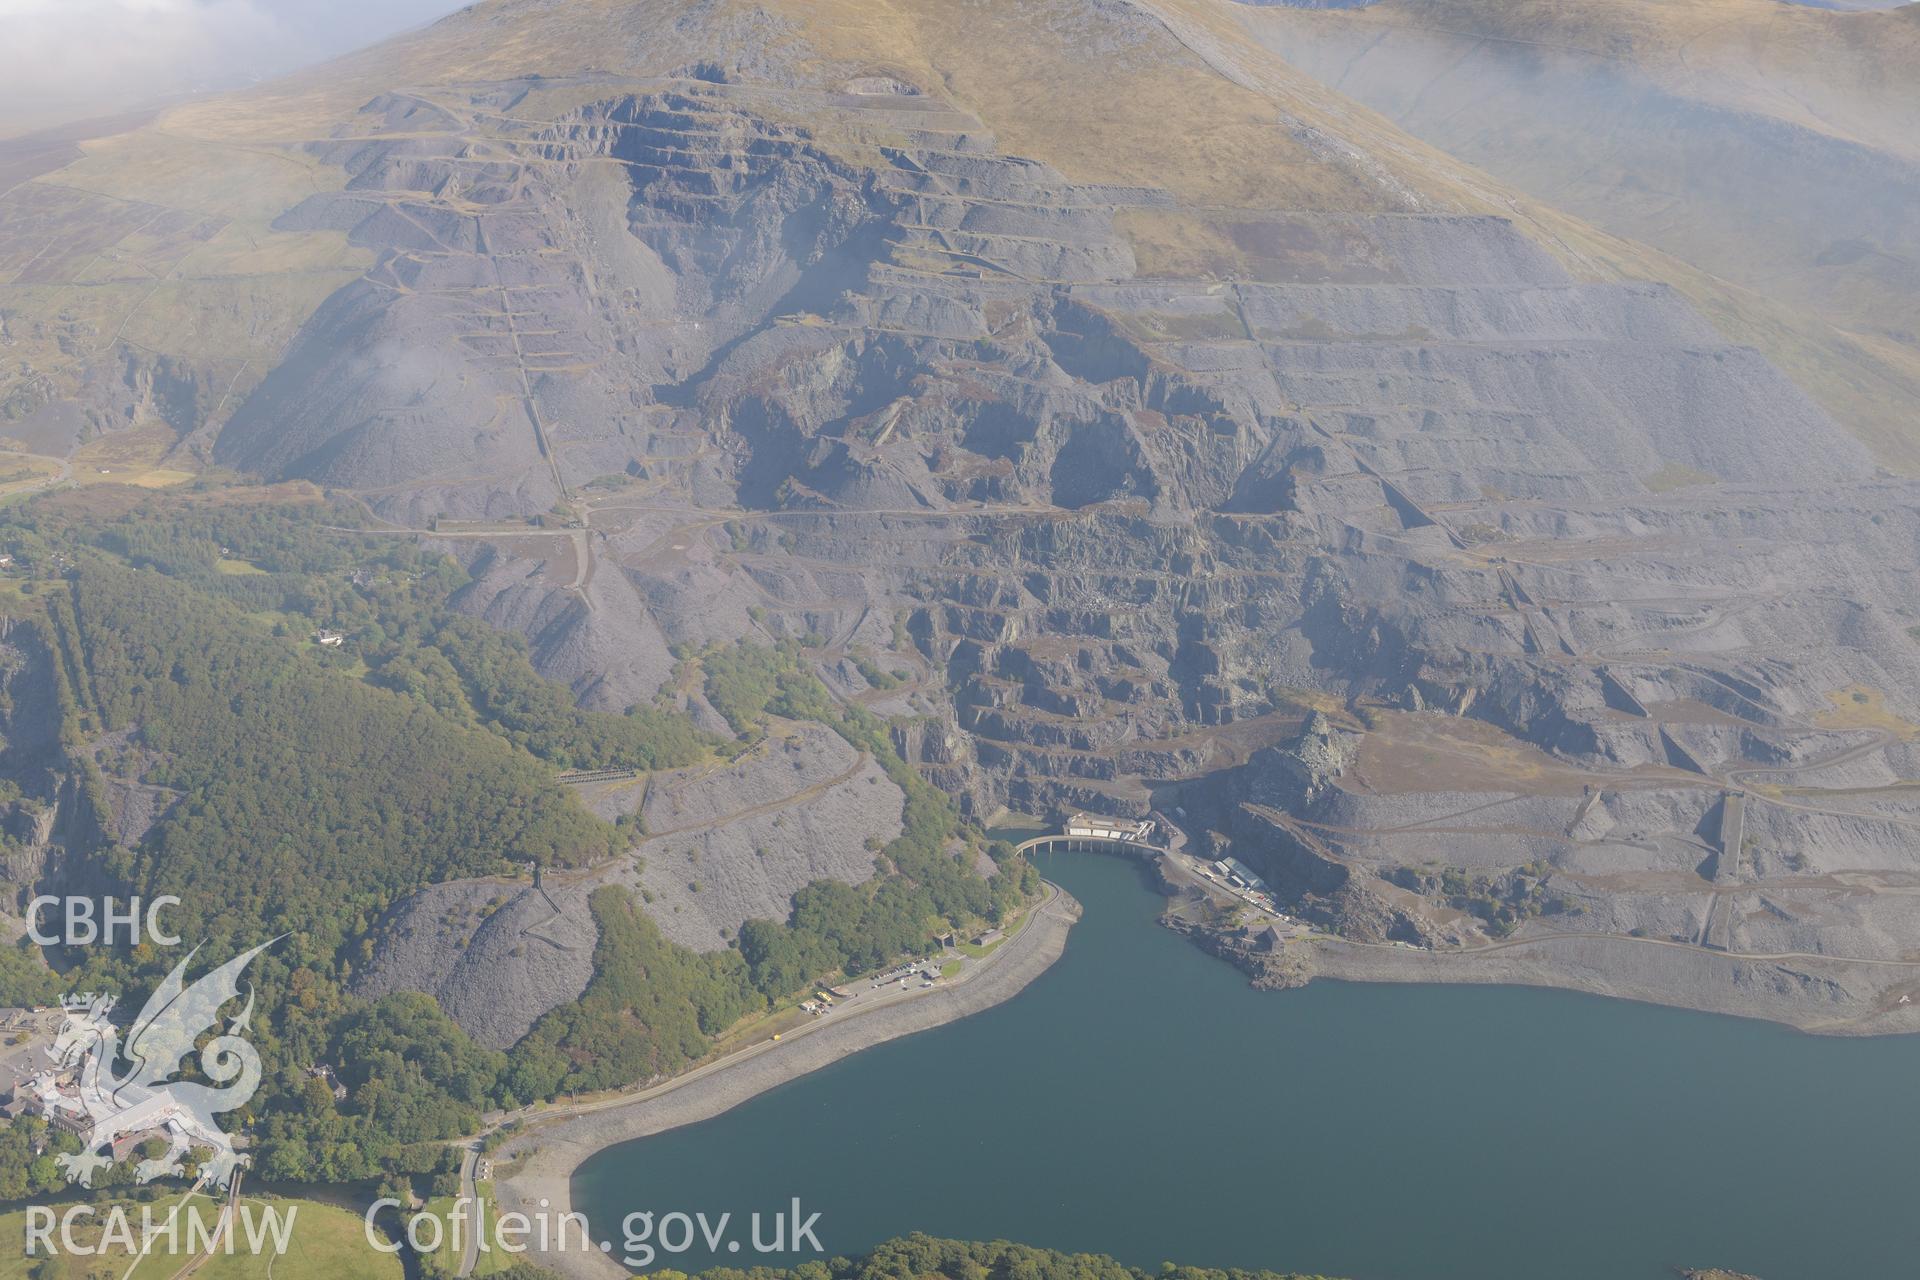 Dinorwic slate quarry; Dinorwig hydro-electric power station (Electric Mountain) and Llyn Peris reservoir, Llanberis. Oblique aerial photograph taken during the Royal Commission's programme of archaeological aerial reconnaissance by Toby Driver on 2nd October 2015.